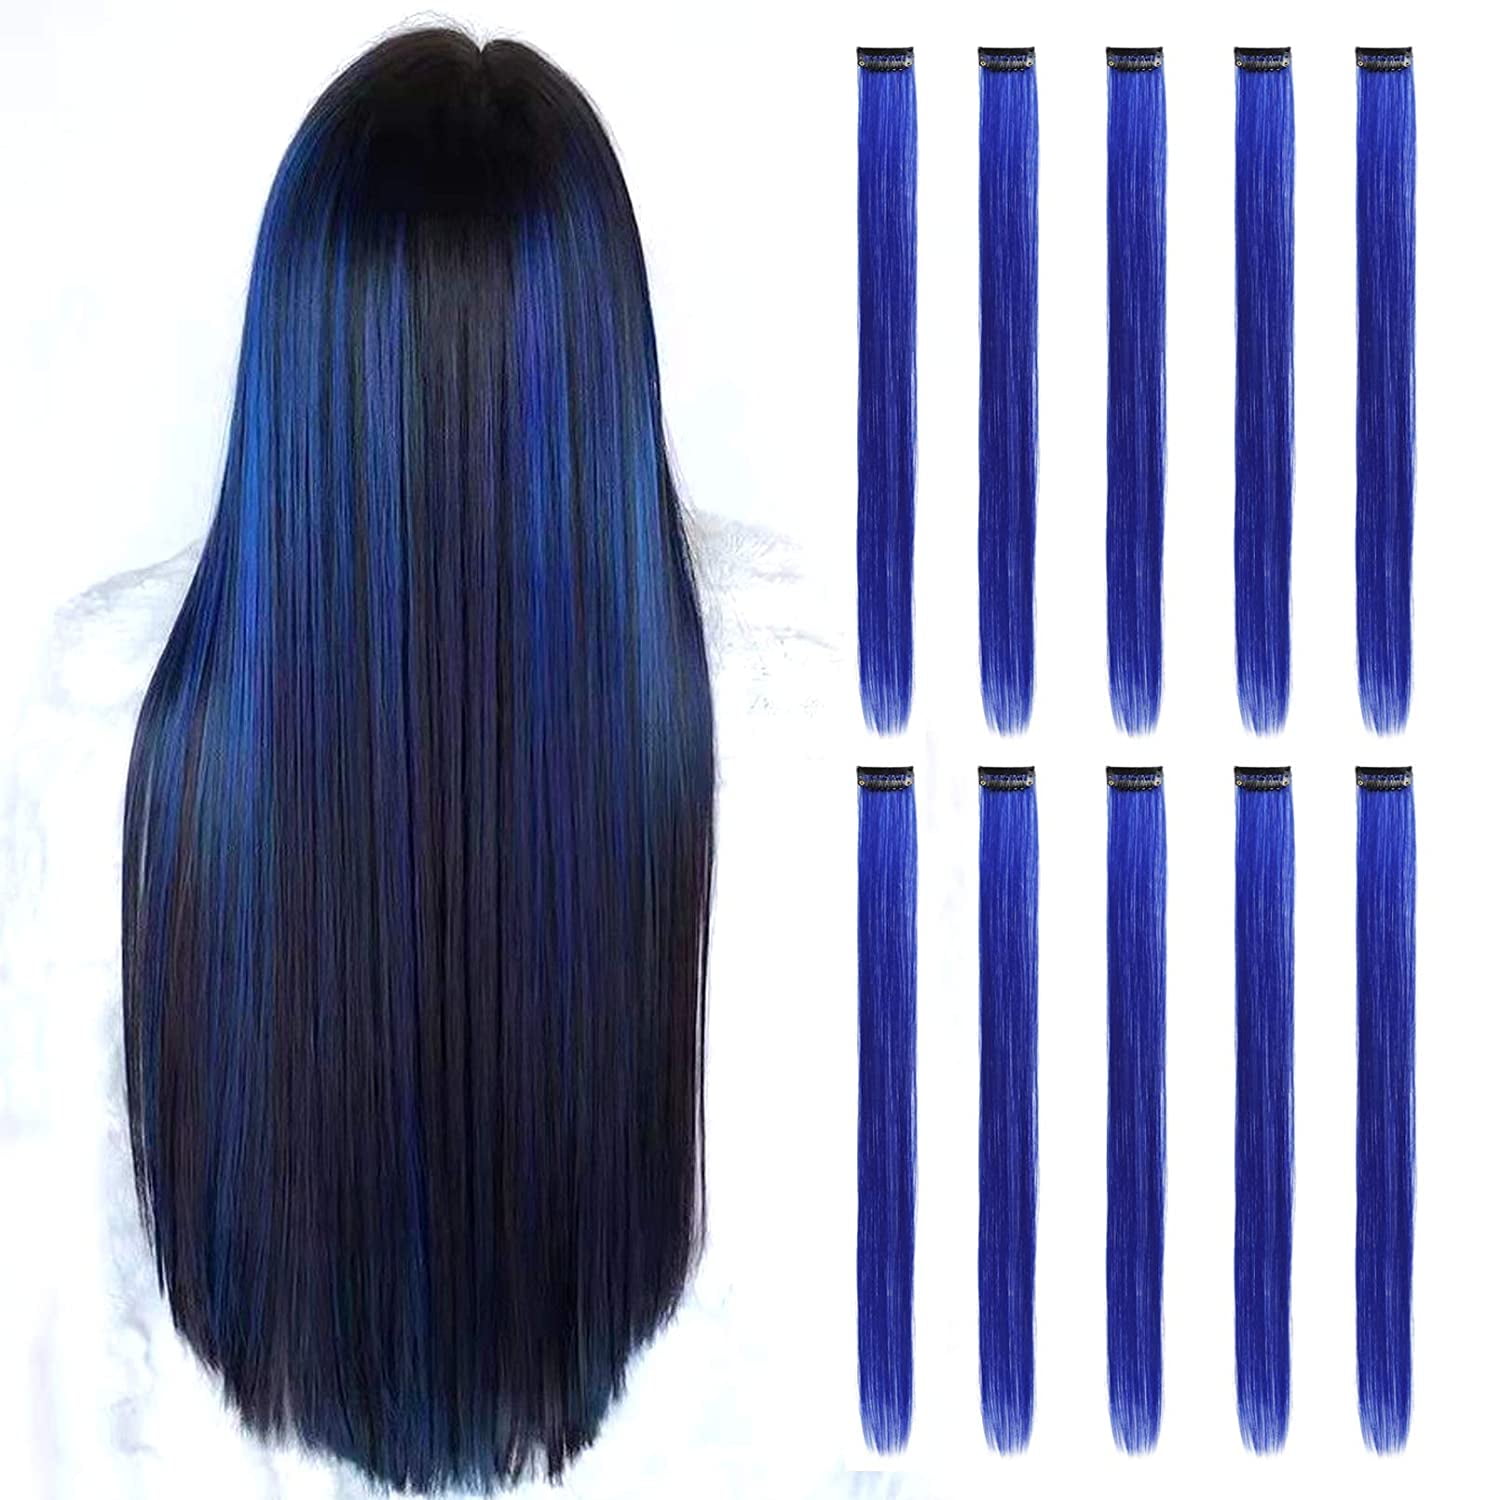 Blue Hair Extensions Clip in, 22 Inch 10 Long Straight Colored, for Kids  Girls Women Highlight Party, Synthetic | Walmart Canada